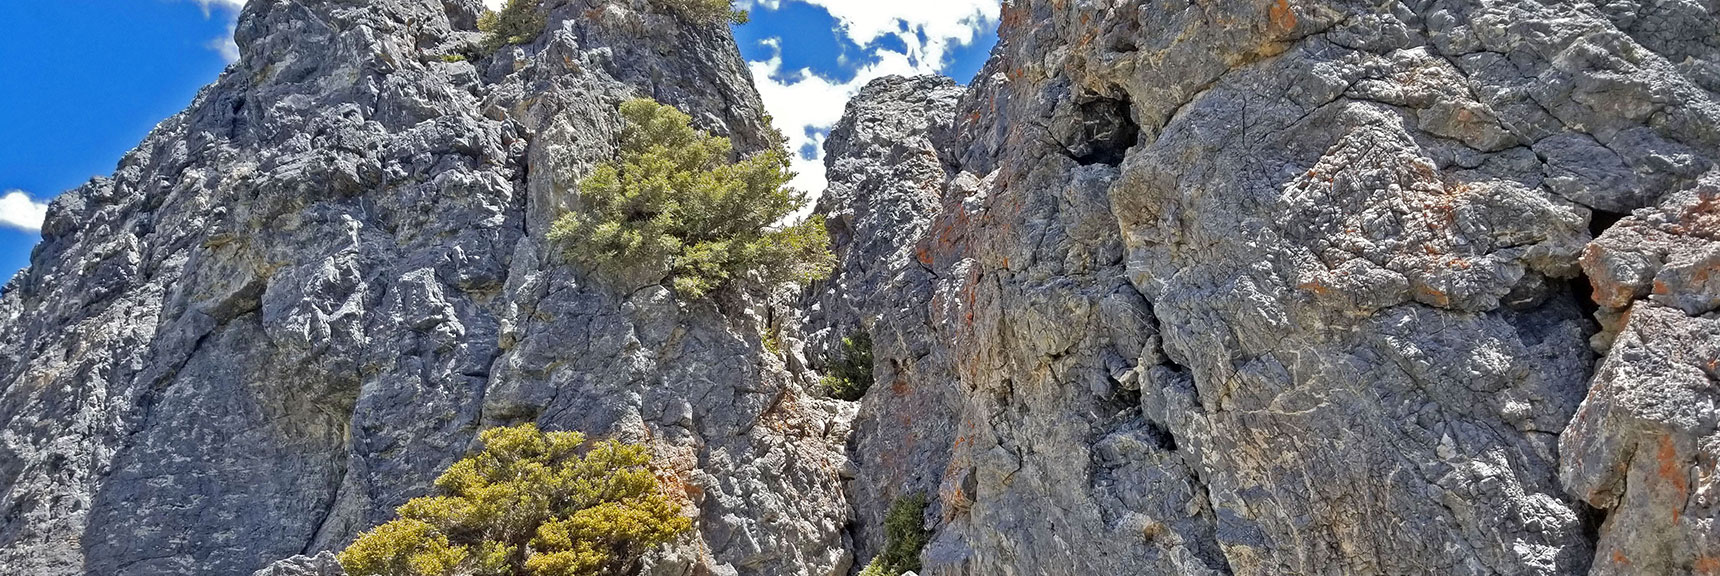 First Class 3 Summit Approach on SW Side of Black Rock Sister | Black Rock Sister | Mt Charleston Wilderness | Lee Canyon | Spring Mountains, Nevada